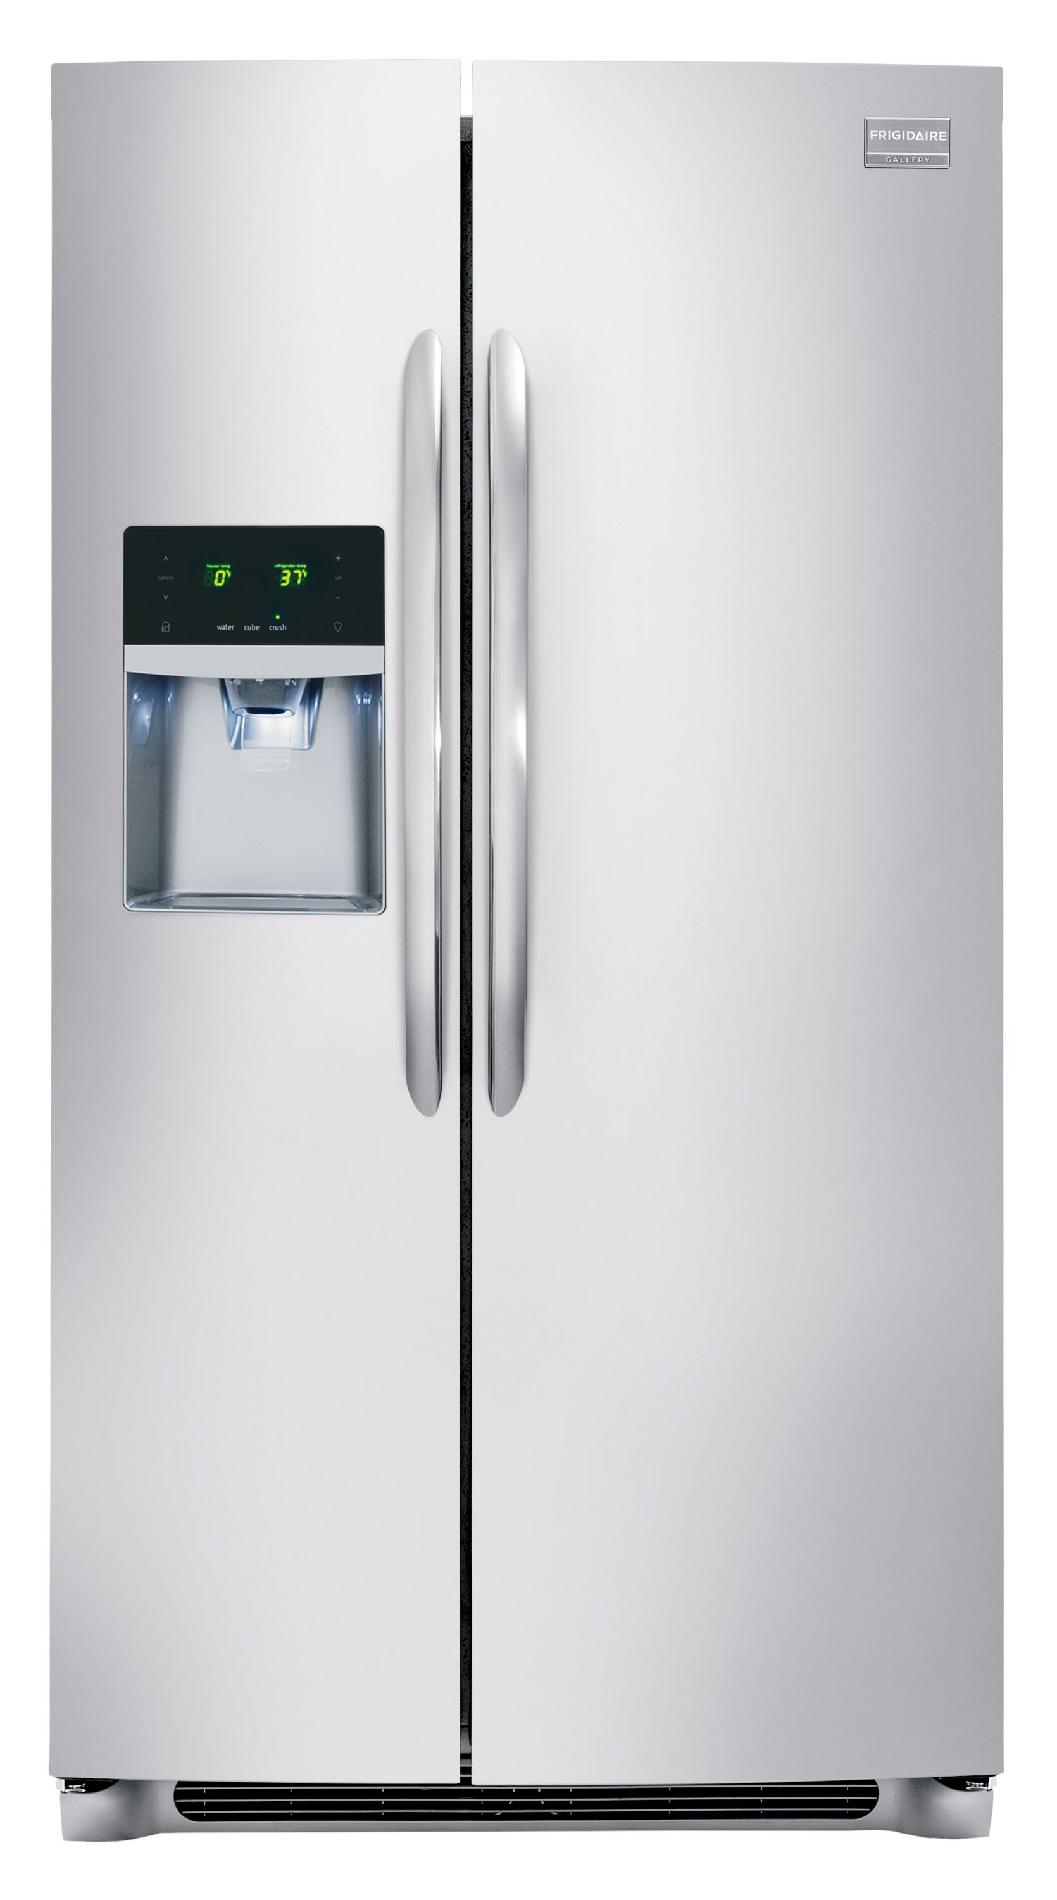 Frigidaire Gallery 22.6 cu. ft. Side-by-Side Refrigerator - Stainless Steel